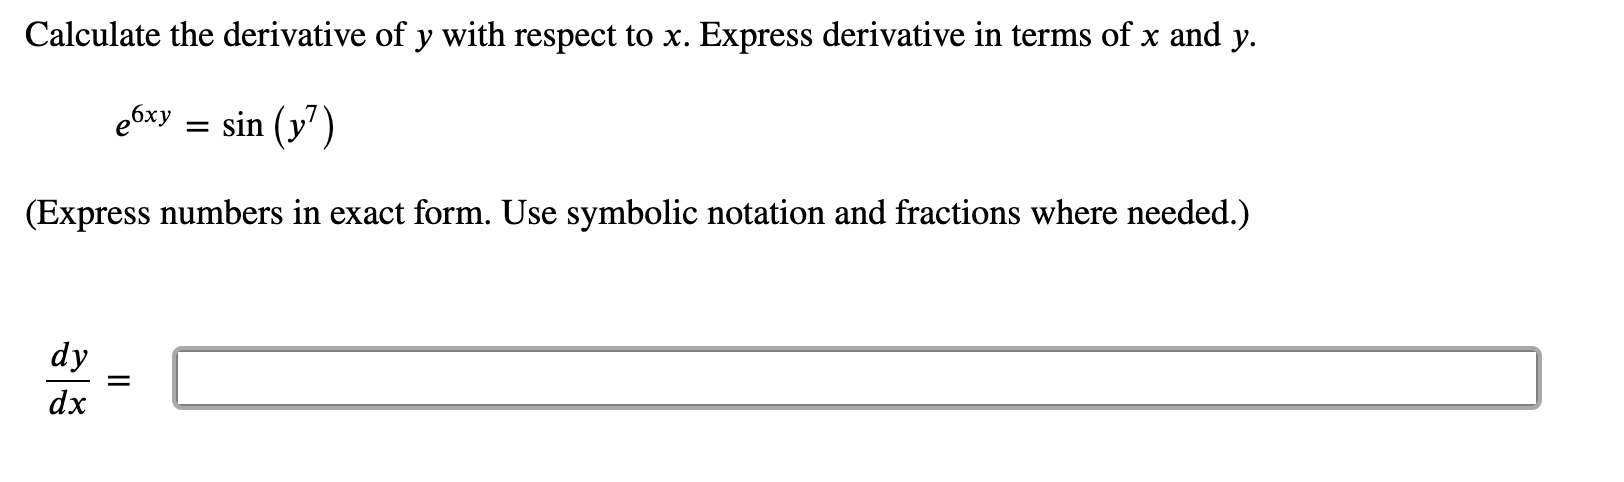 Calculate the derivative of y with respect to x. Express derivative in terms of x and y.
e6xy = sin (y')
(Express numbers in exact form. Use symbolic notation and fractions where needed.)
dy
dx
II
